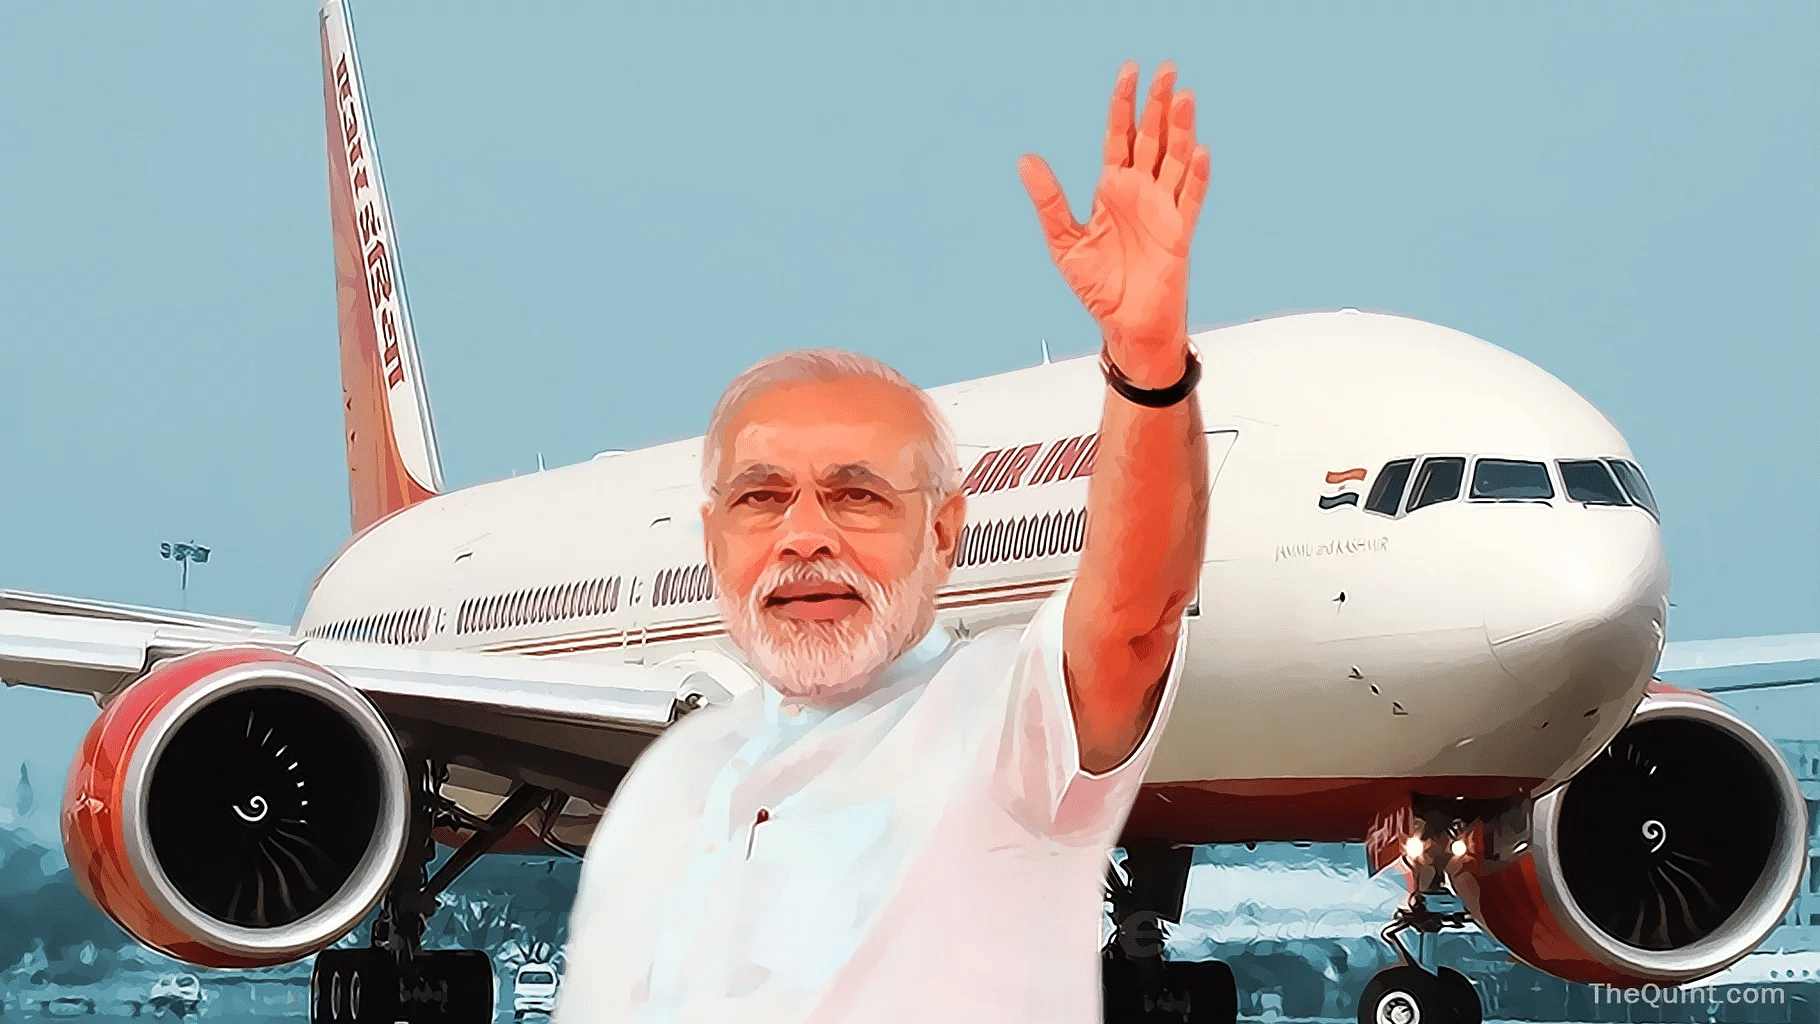 Since 2015, Prime Minister Narendra Modi has visited 58 countries: Govt